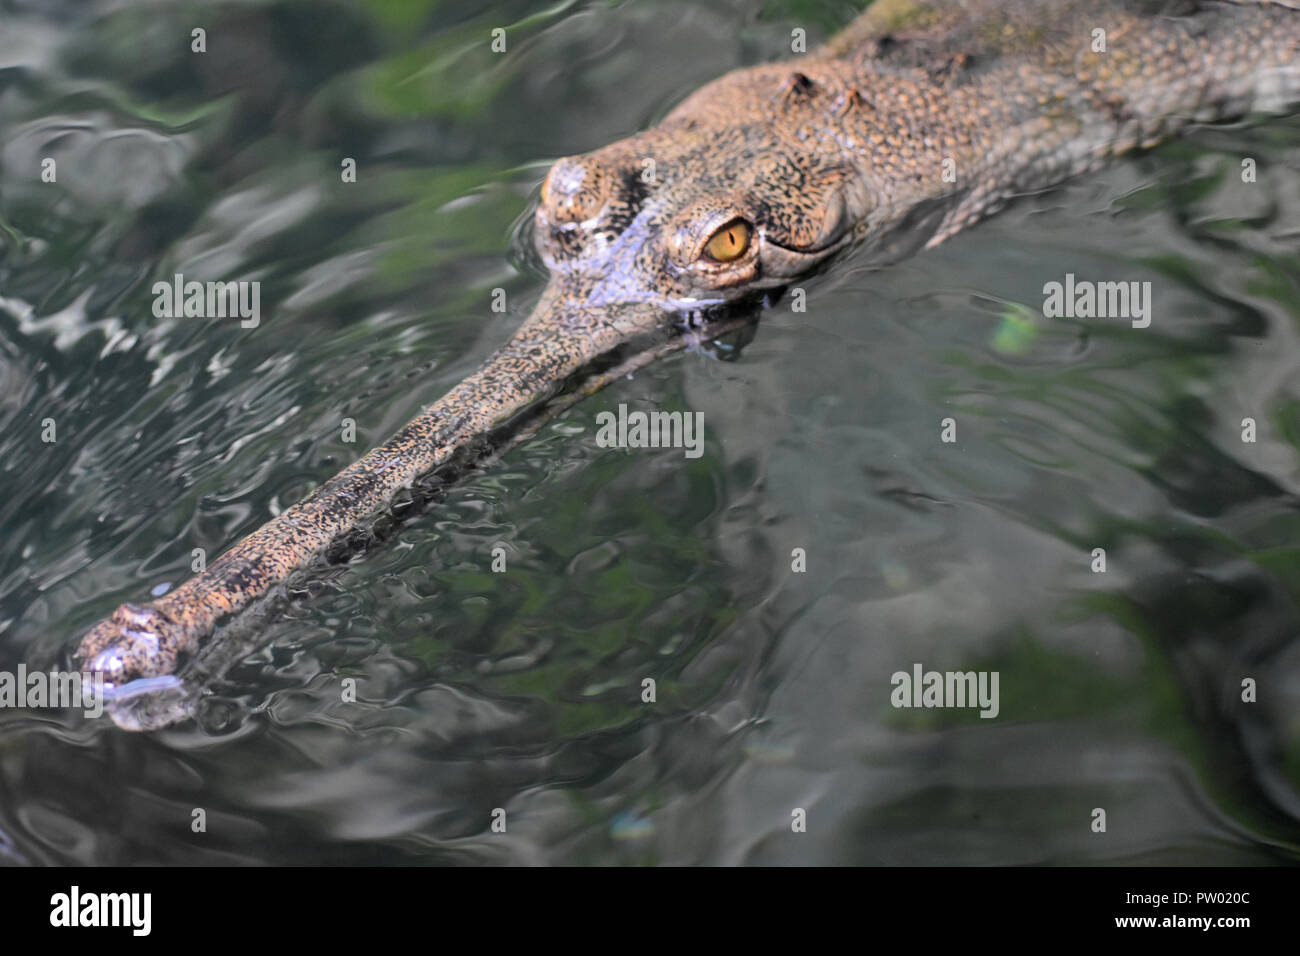 Gavial crocodile peering out of the water's surface. Stock Photo